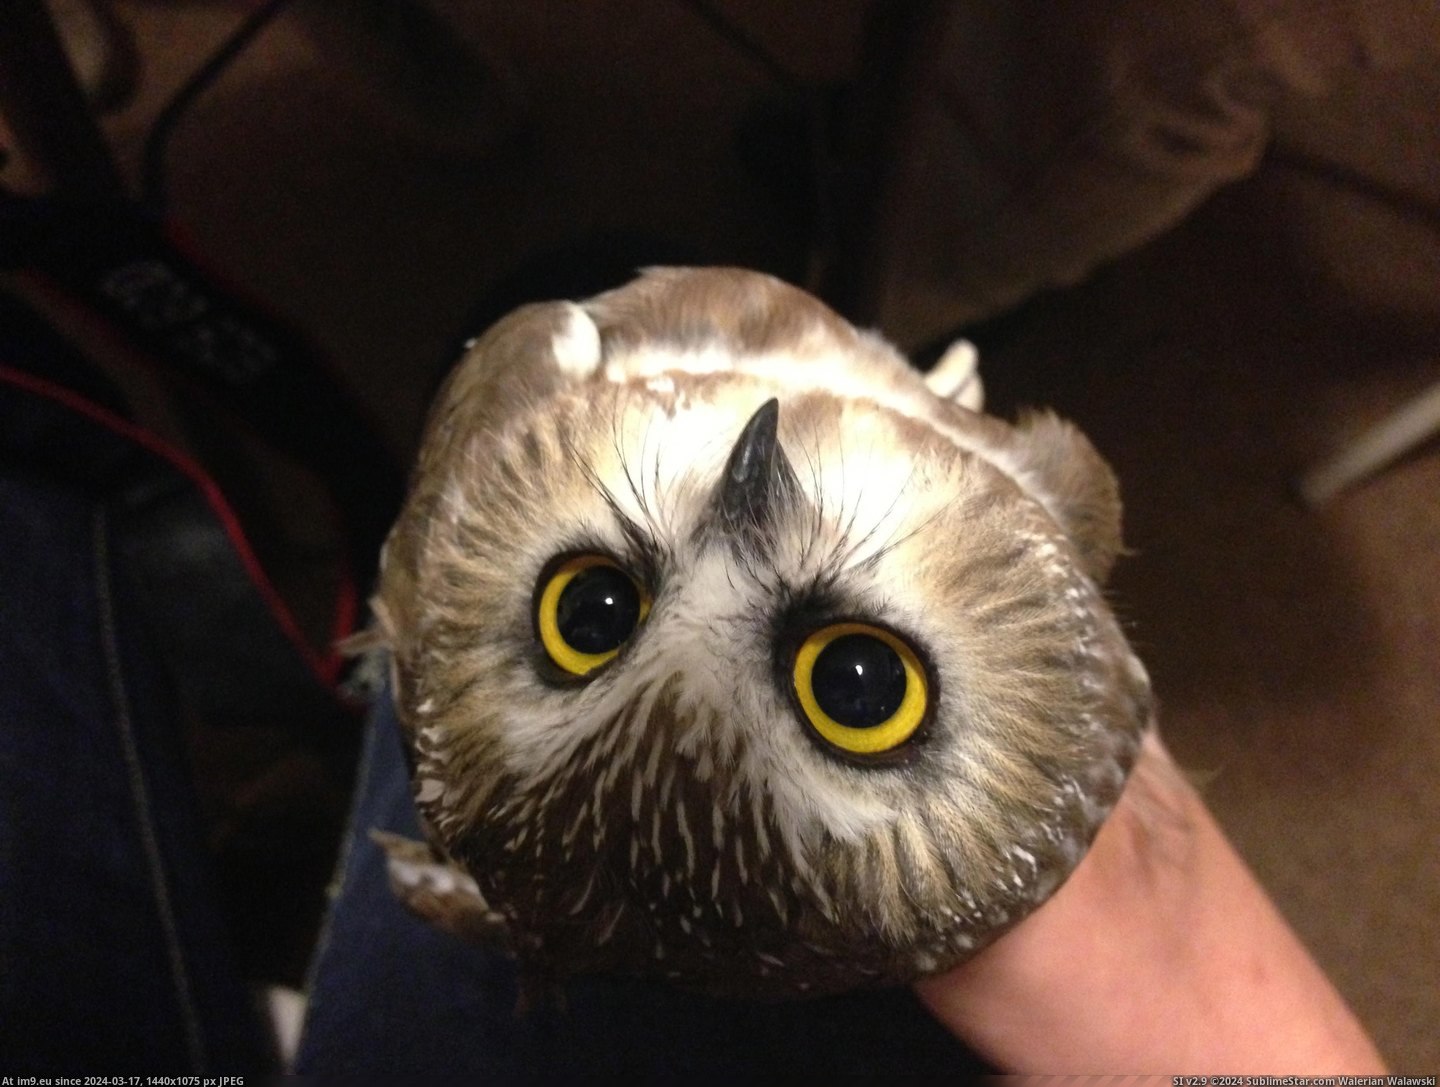 #Photos #Owls #Research #Tiny [Pics] More photos of my research on tiny owls! 2 Pic. (Image of album My r/PICS favs))